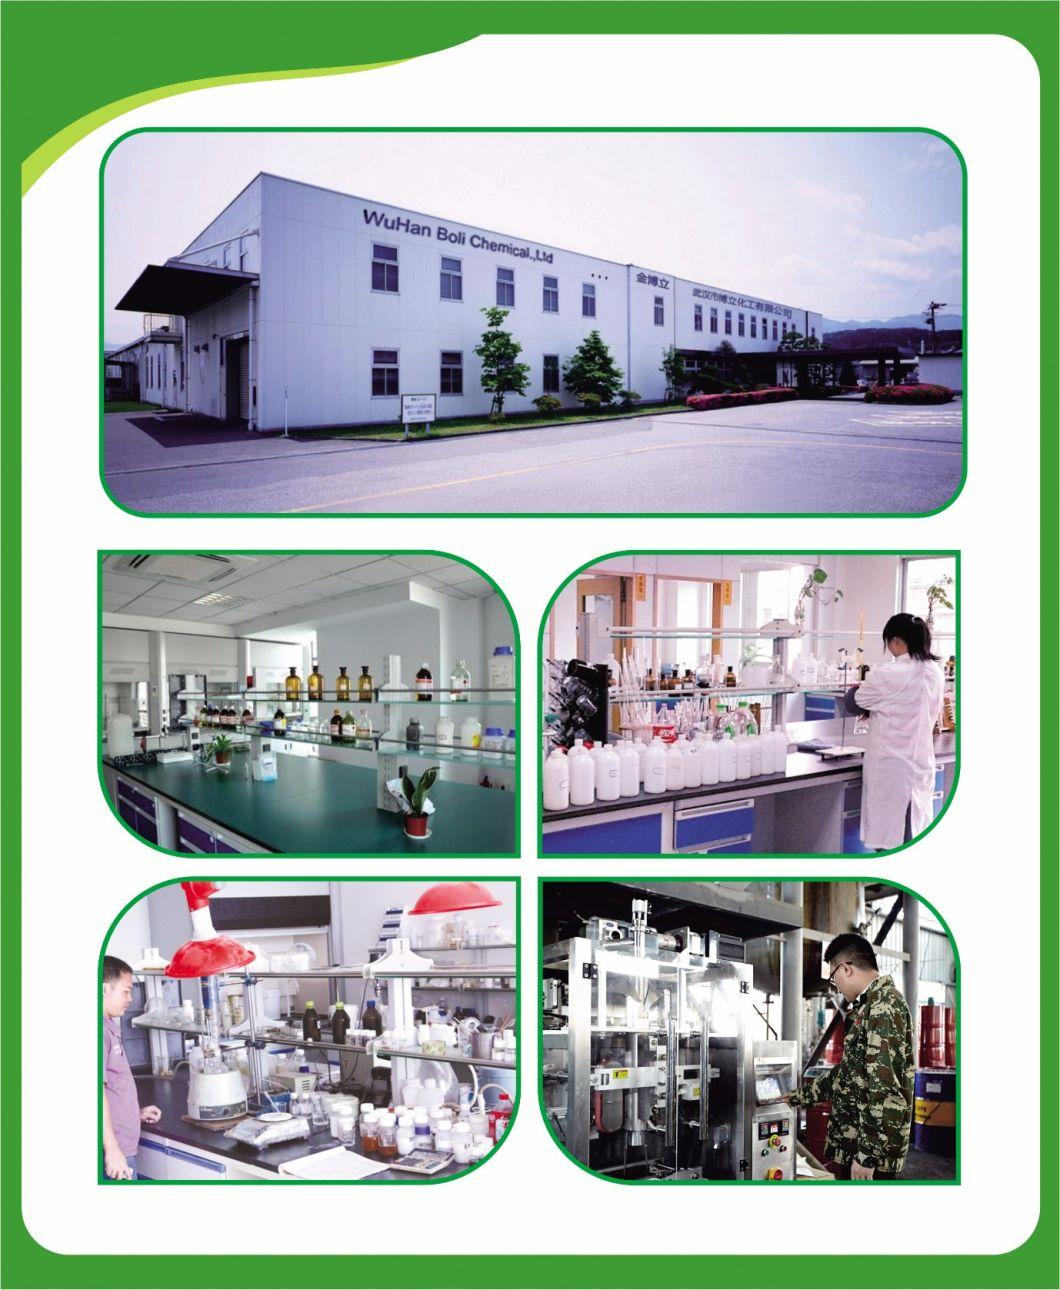 China Supplier Manufacturer Super Adhesive High Quality